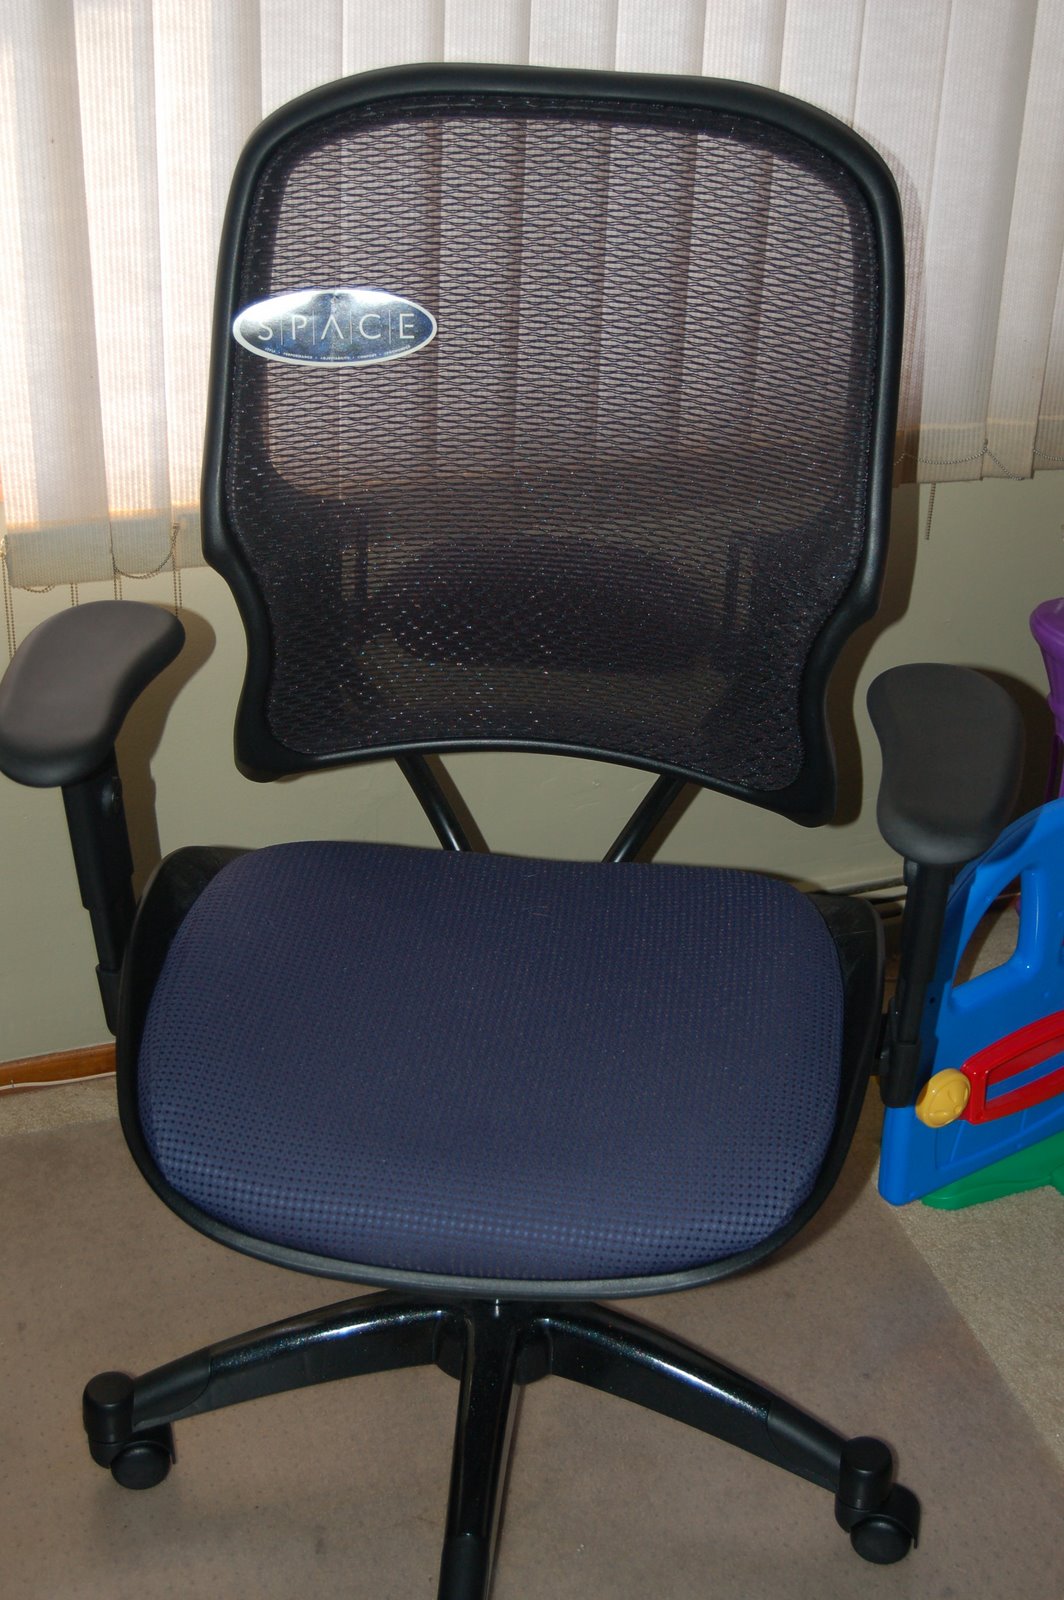 Our new office chair so he can sit at the computer in comfort. It's the Minnie Pearl model.